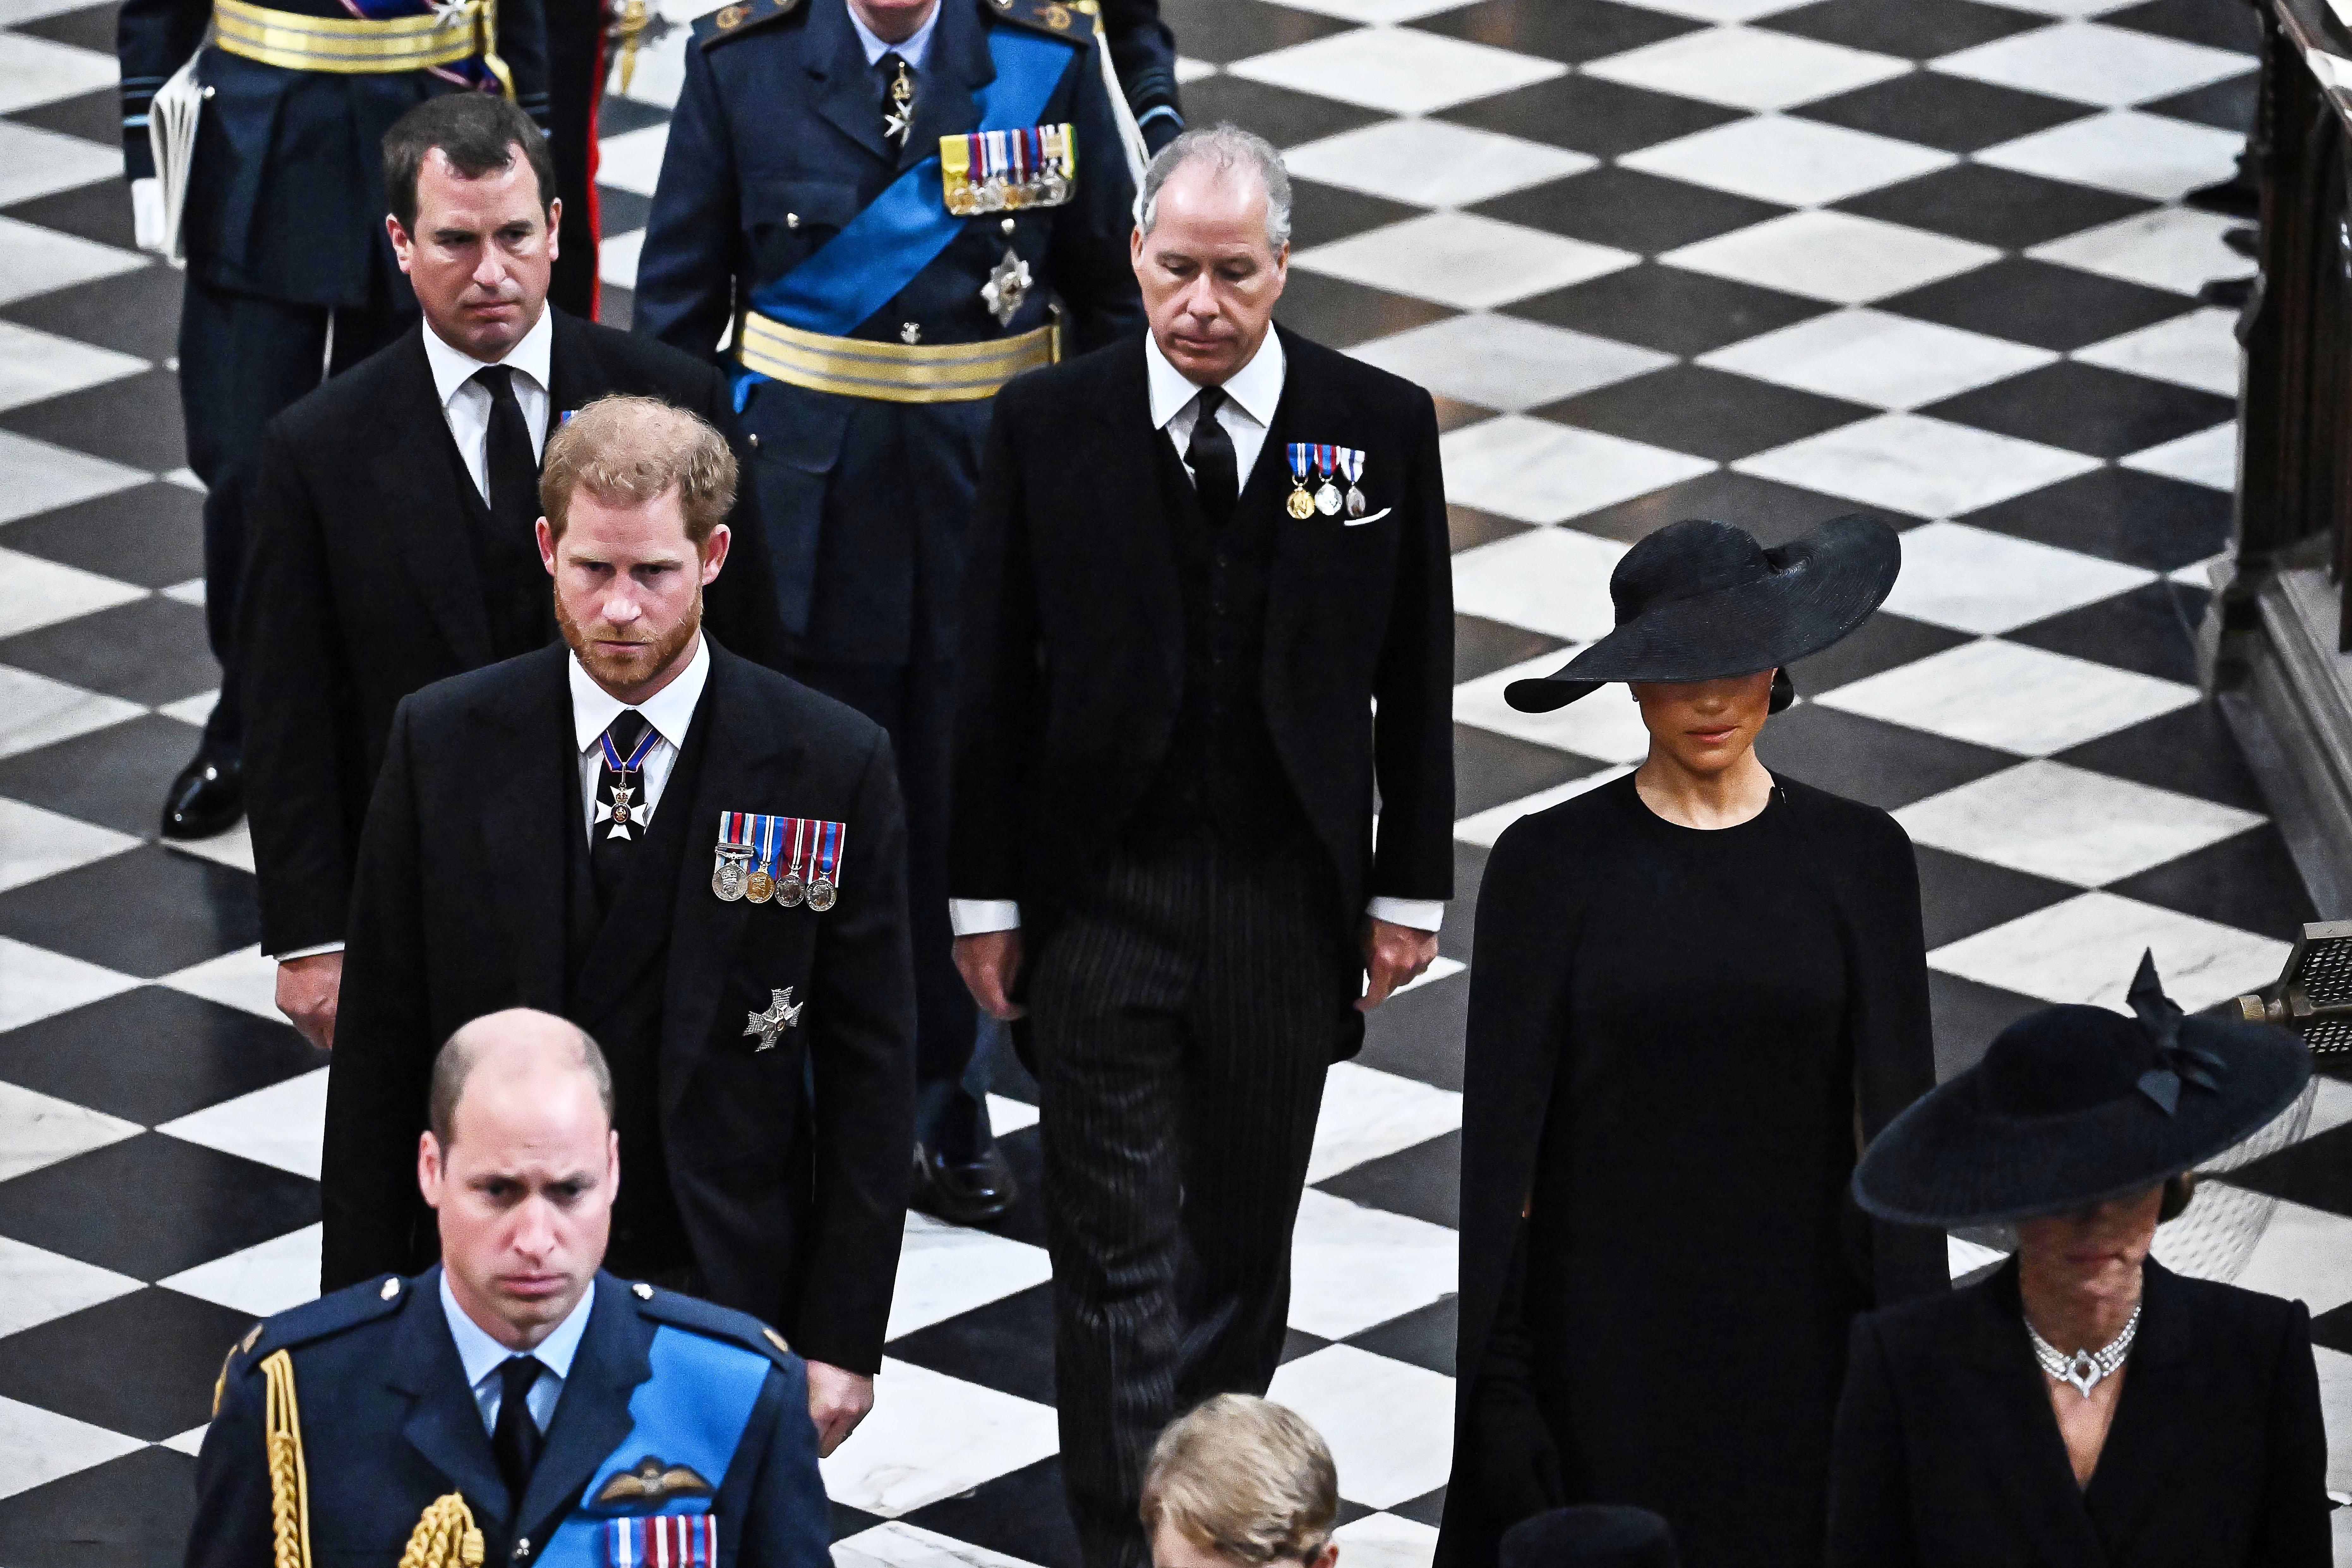 Peter Phillips, Prince Harry, Duke of Sussex, Prince William, Prince of Wales, Earl of Snowdon, and Meghan, Duchess of Sussex leave the Abbey at the State Funeral Service for Britain's Queen Elizabeth II at Westminster Abbey on September 19, 2022, in London, England. | Source: Getty Images